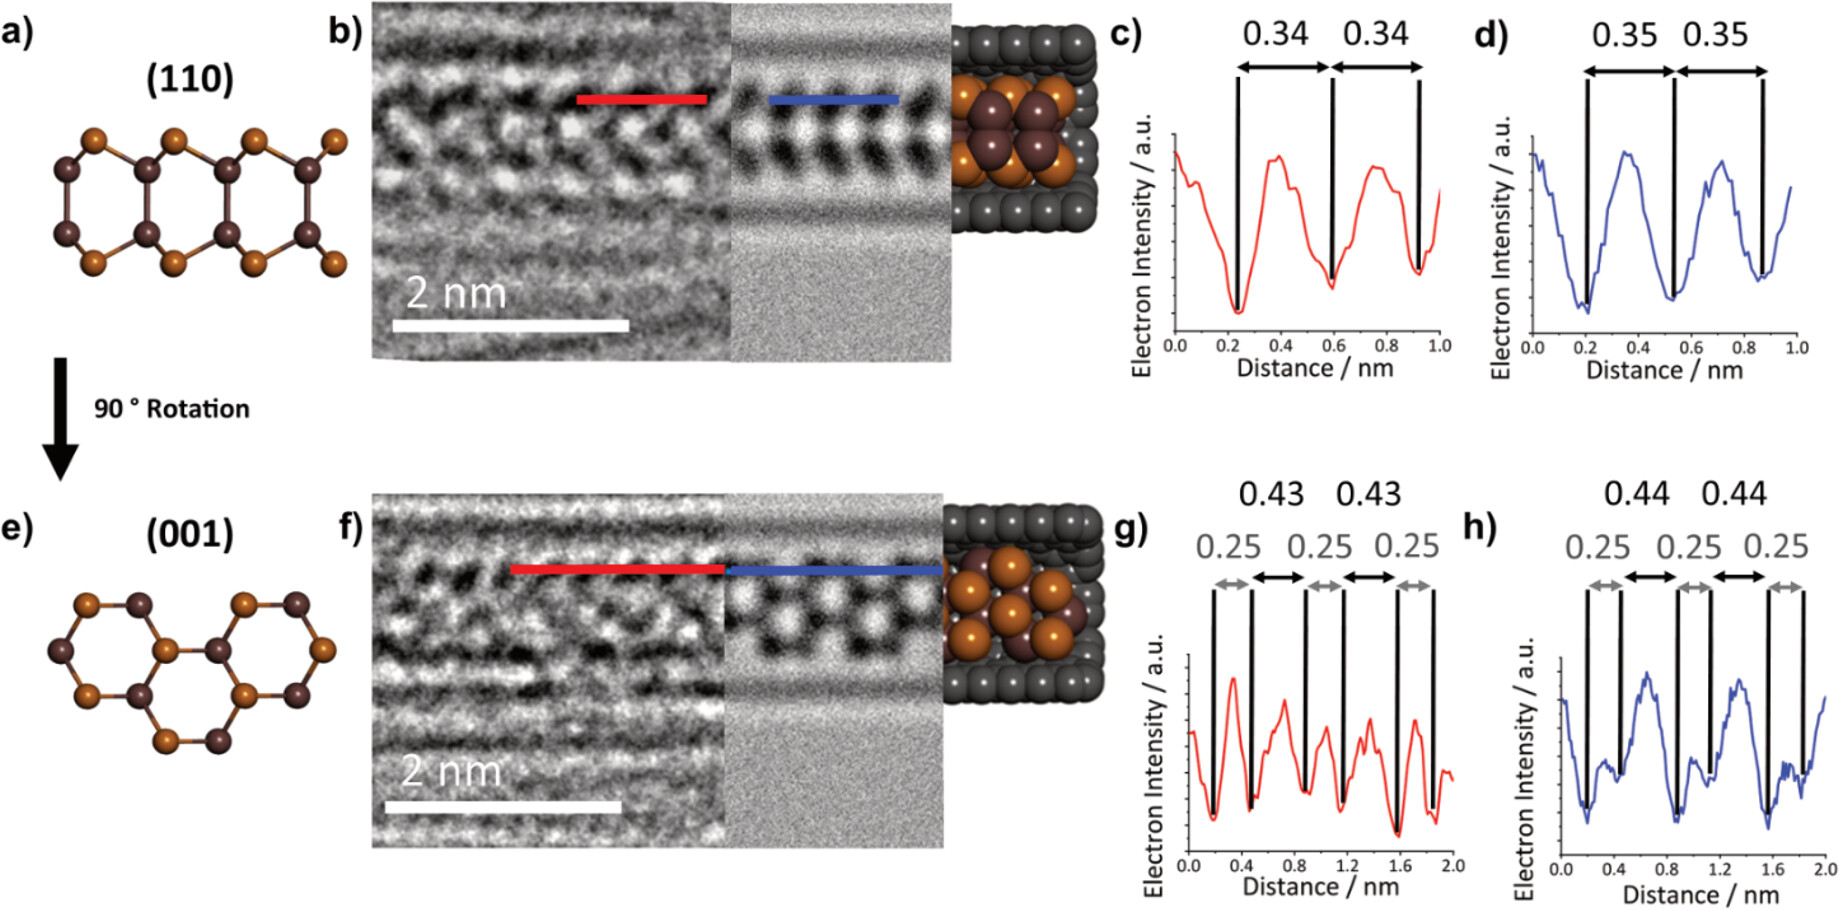 (a) Structural model of monolayer InSe in the (110) orientation. (b) Three-part composite image of an InSe nanoribbon inside a SWCNT, consisting of an AC-TEM image (left), a simulated TEM image (center), and molecular model (right). (c, d) Electron density profile maps in red, generated from the red line superimposed over the experimental AC-TEM image in (b), and in blue, generated from the blue line superimposed over the simulated TEM image in (b), with calculated interatomic distances highlighted in nm. (e–h) The same as (a–d), respectively, but for the (001) orientation of the same nanoribbon.